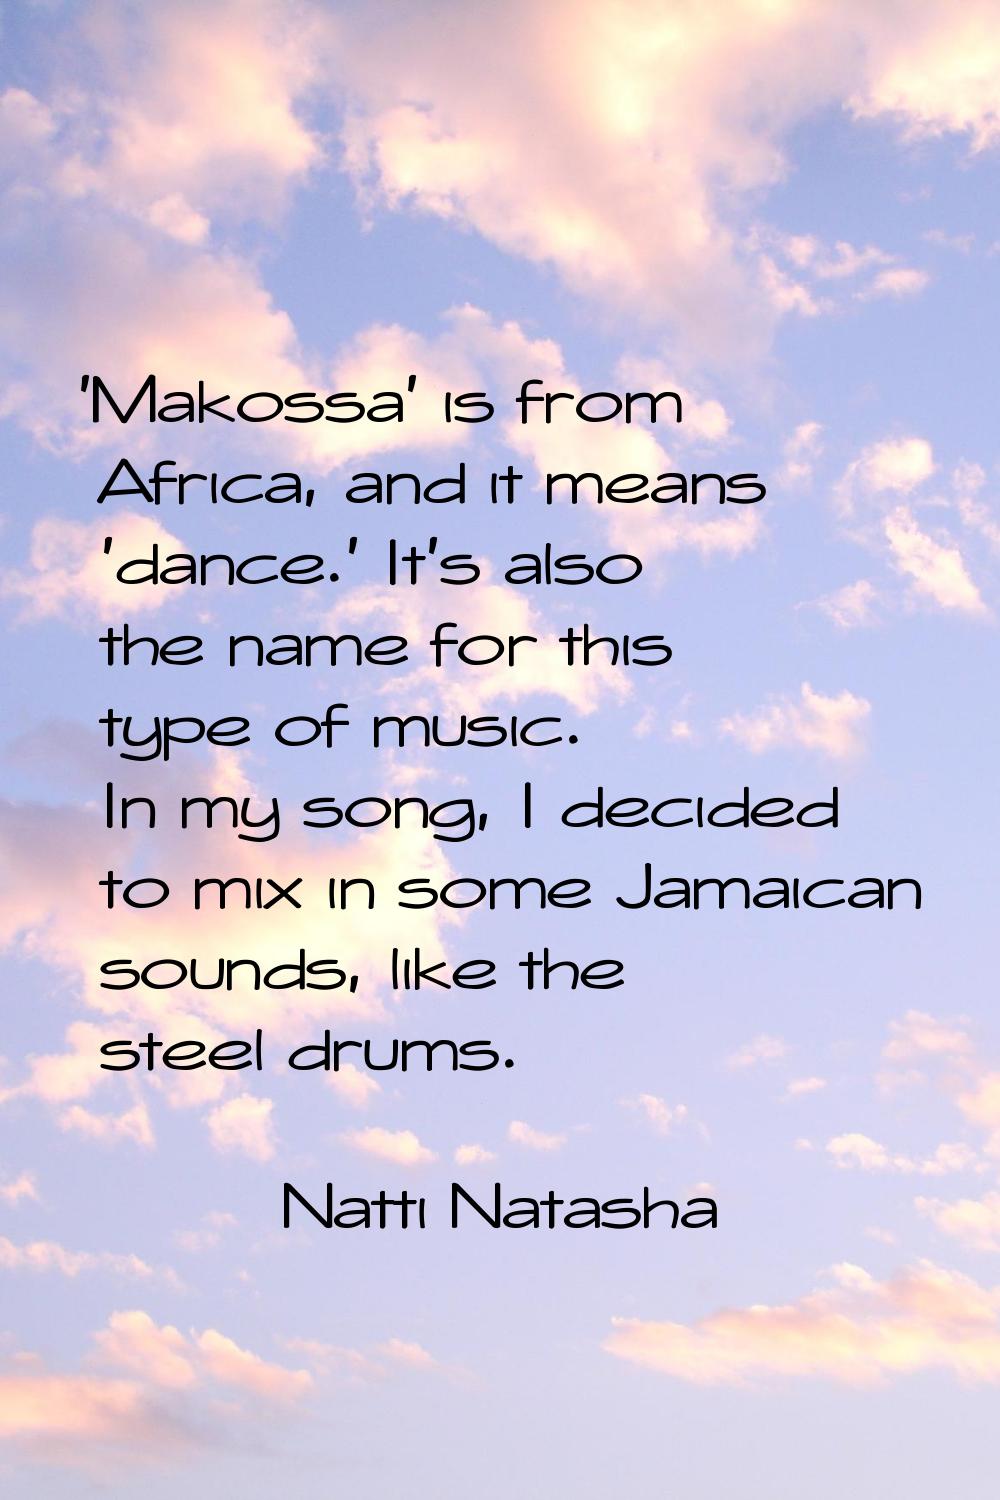 'Makossa' is from Africa, and it means 'dance.' It's also the name for this type of music. In my so